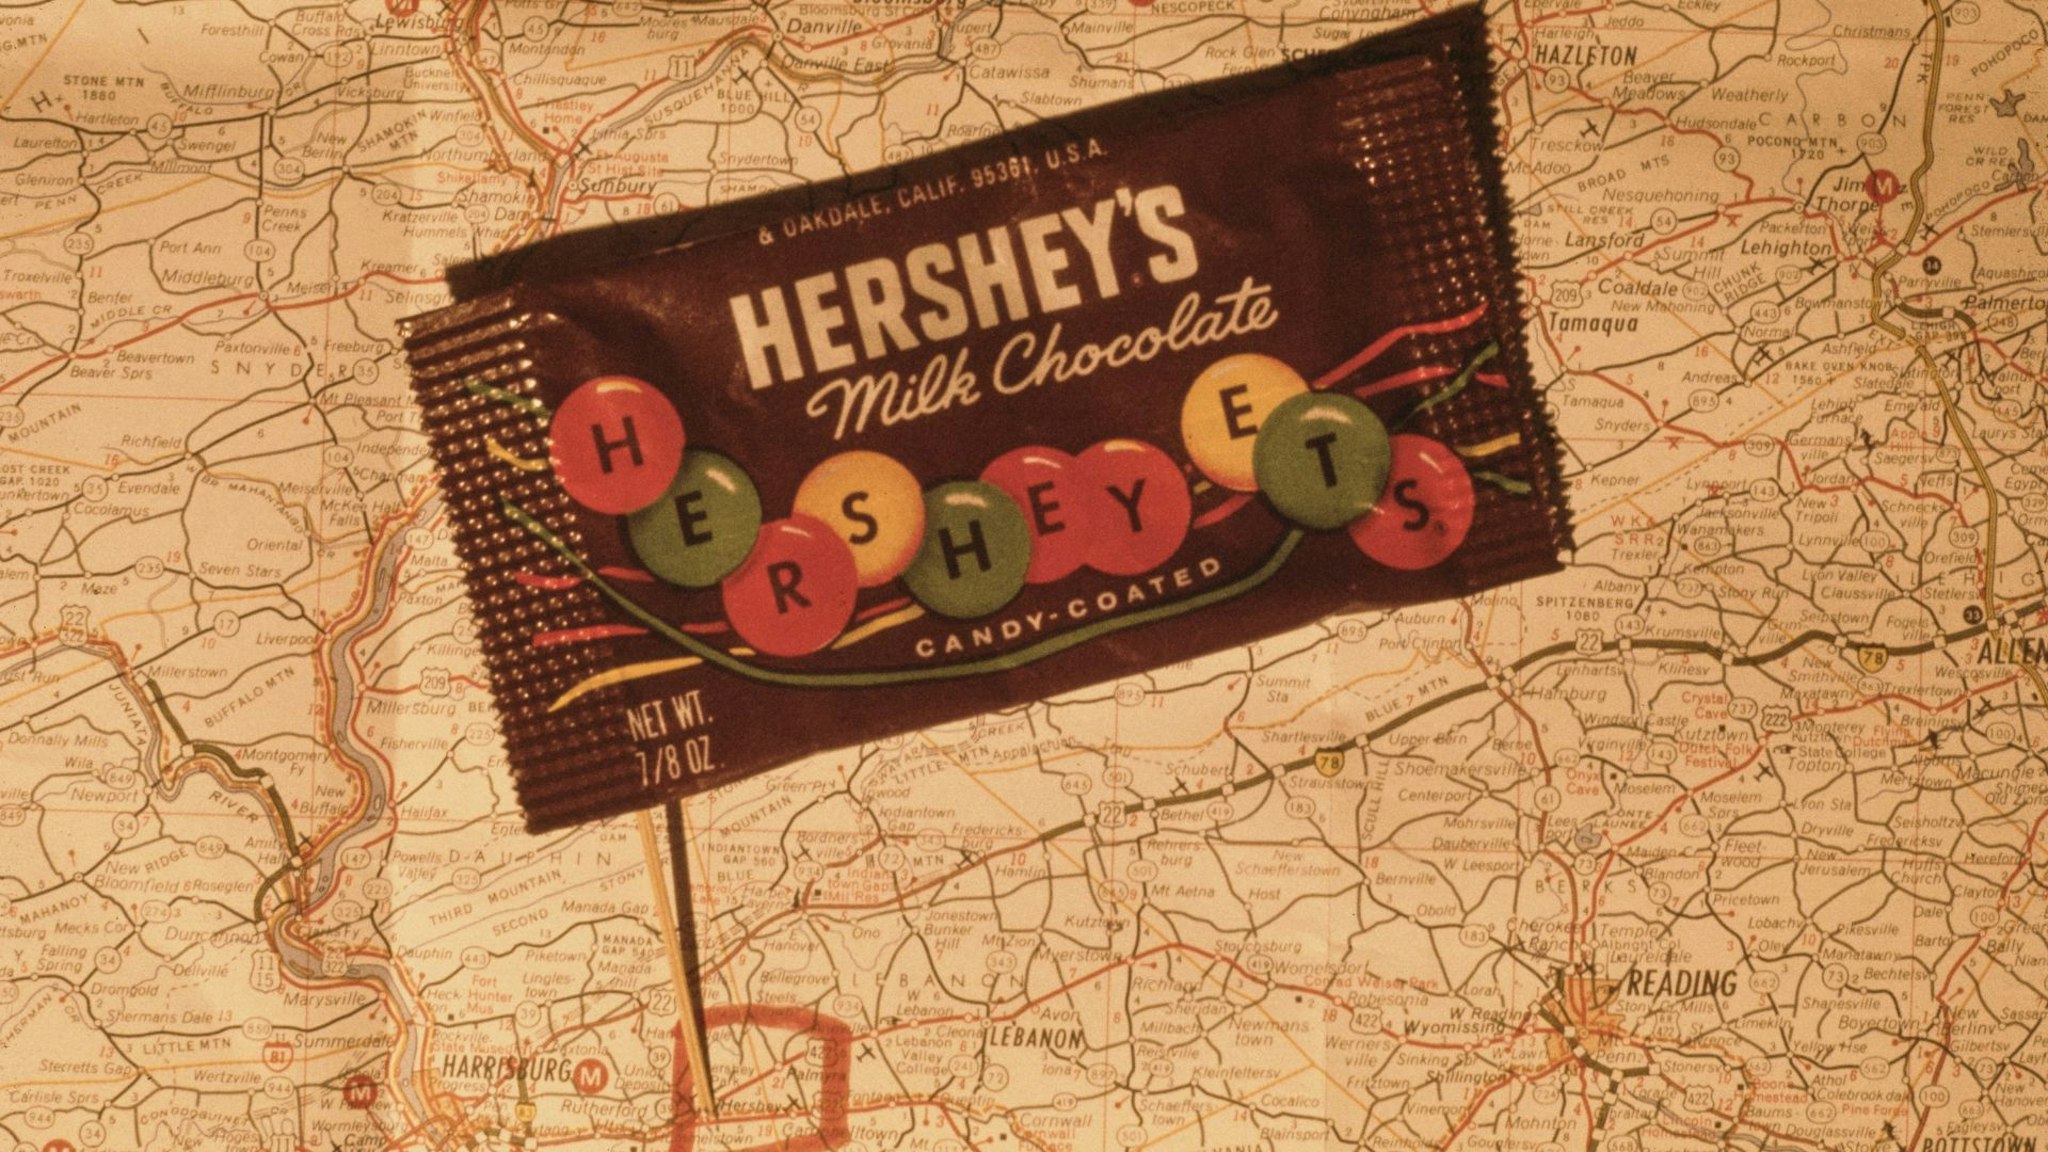 A packet of candy-coated Hershey's milk chocolate on a map of Pennsylvania, showing the location of the original Hershey chocolate factory in Hershey, Derry Township, USA, just east of Harrisburg, November 1969.